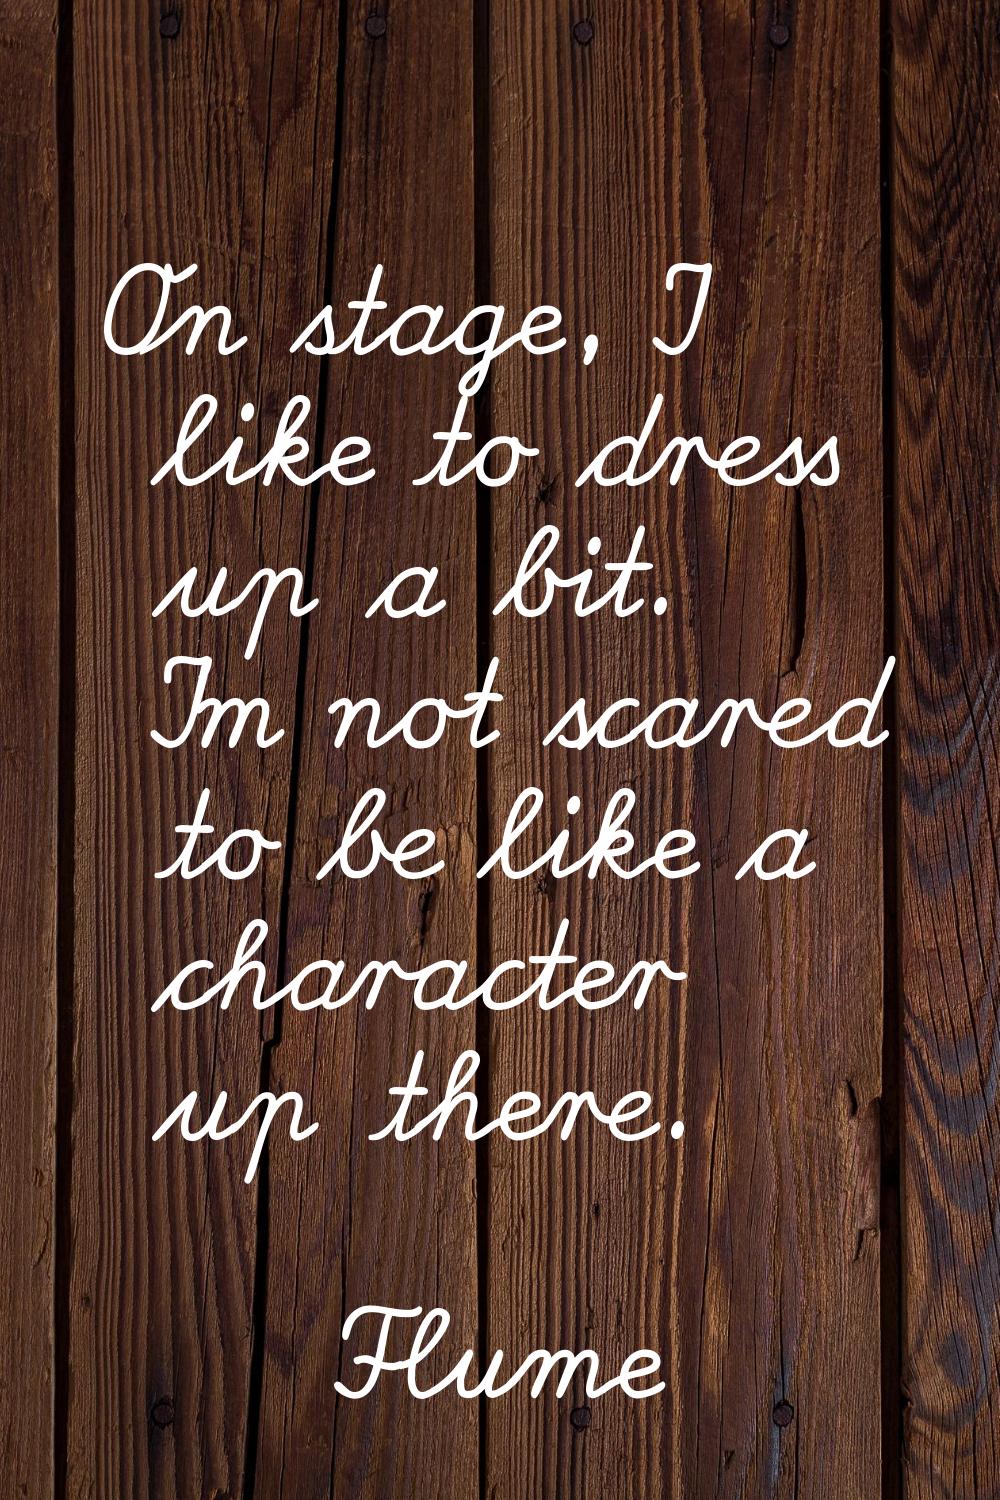 On stage, I like to dress up a bit. I'm not scared to be like a character up there.